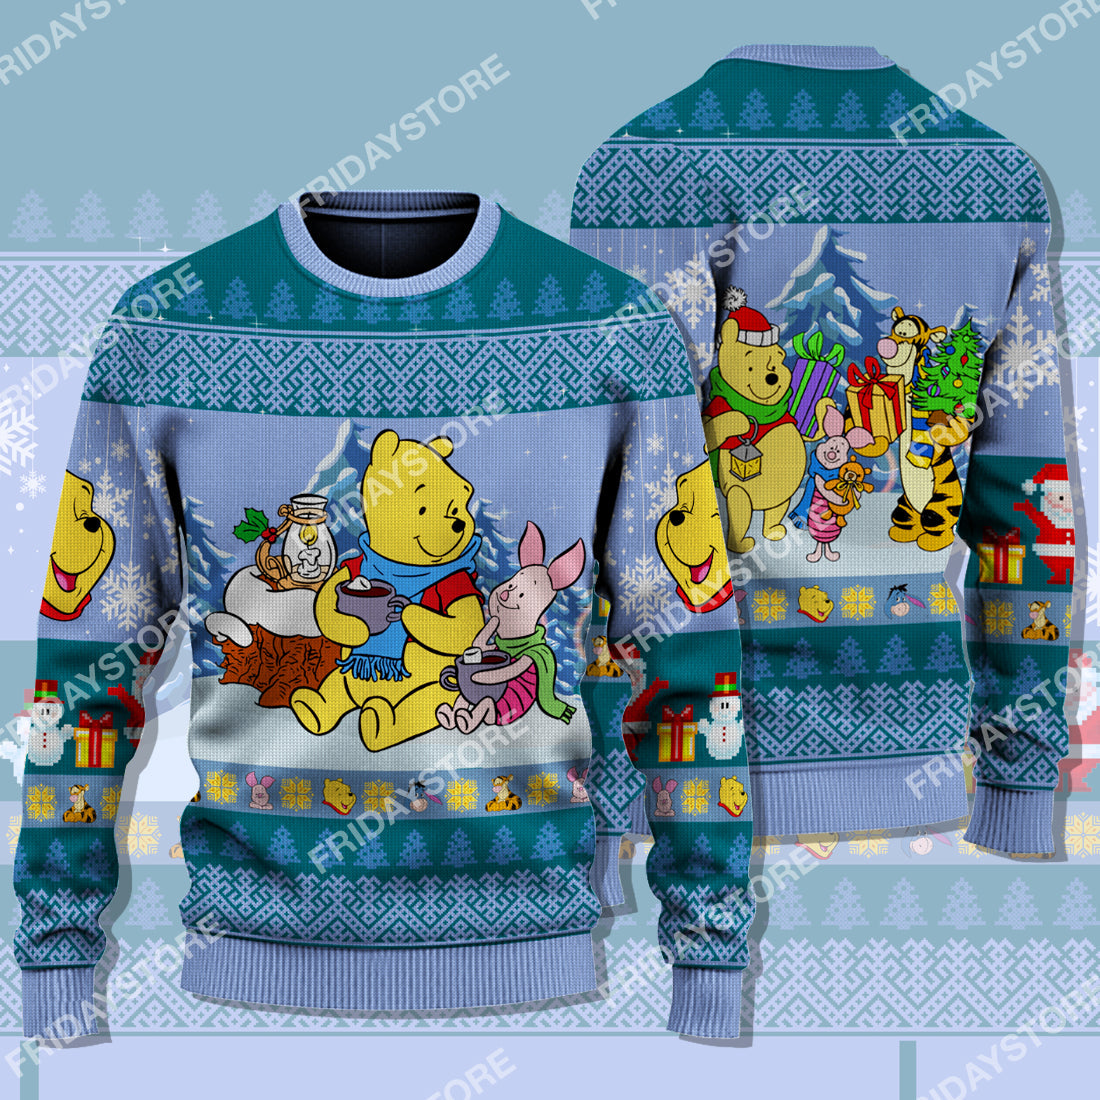 Disney Winnie The Pooh Sweater Pooh And Piglet Hot Cocoa Christmas Ugly Sweater Cute High Quality Disney Winnie The Pooh Ugly Sweater 2223